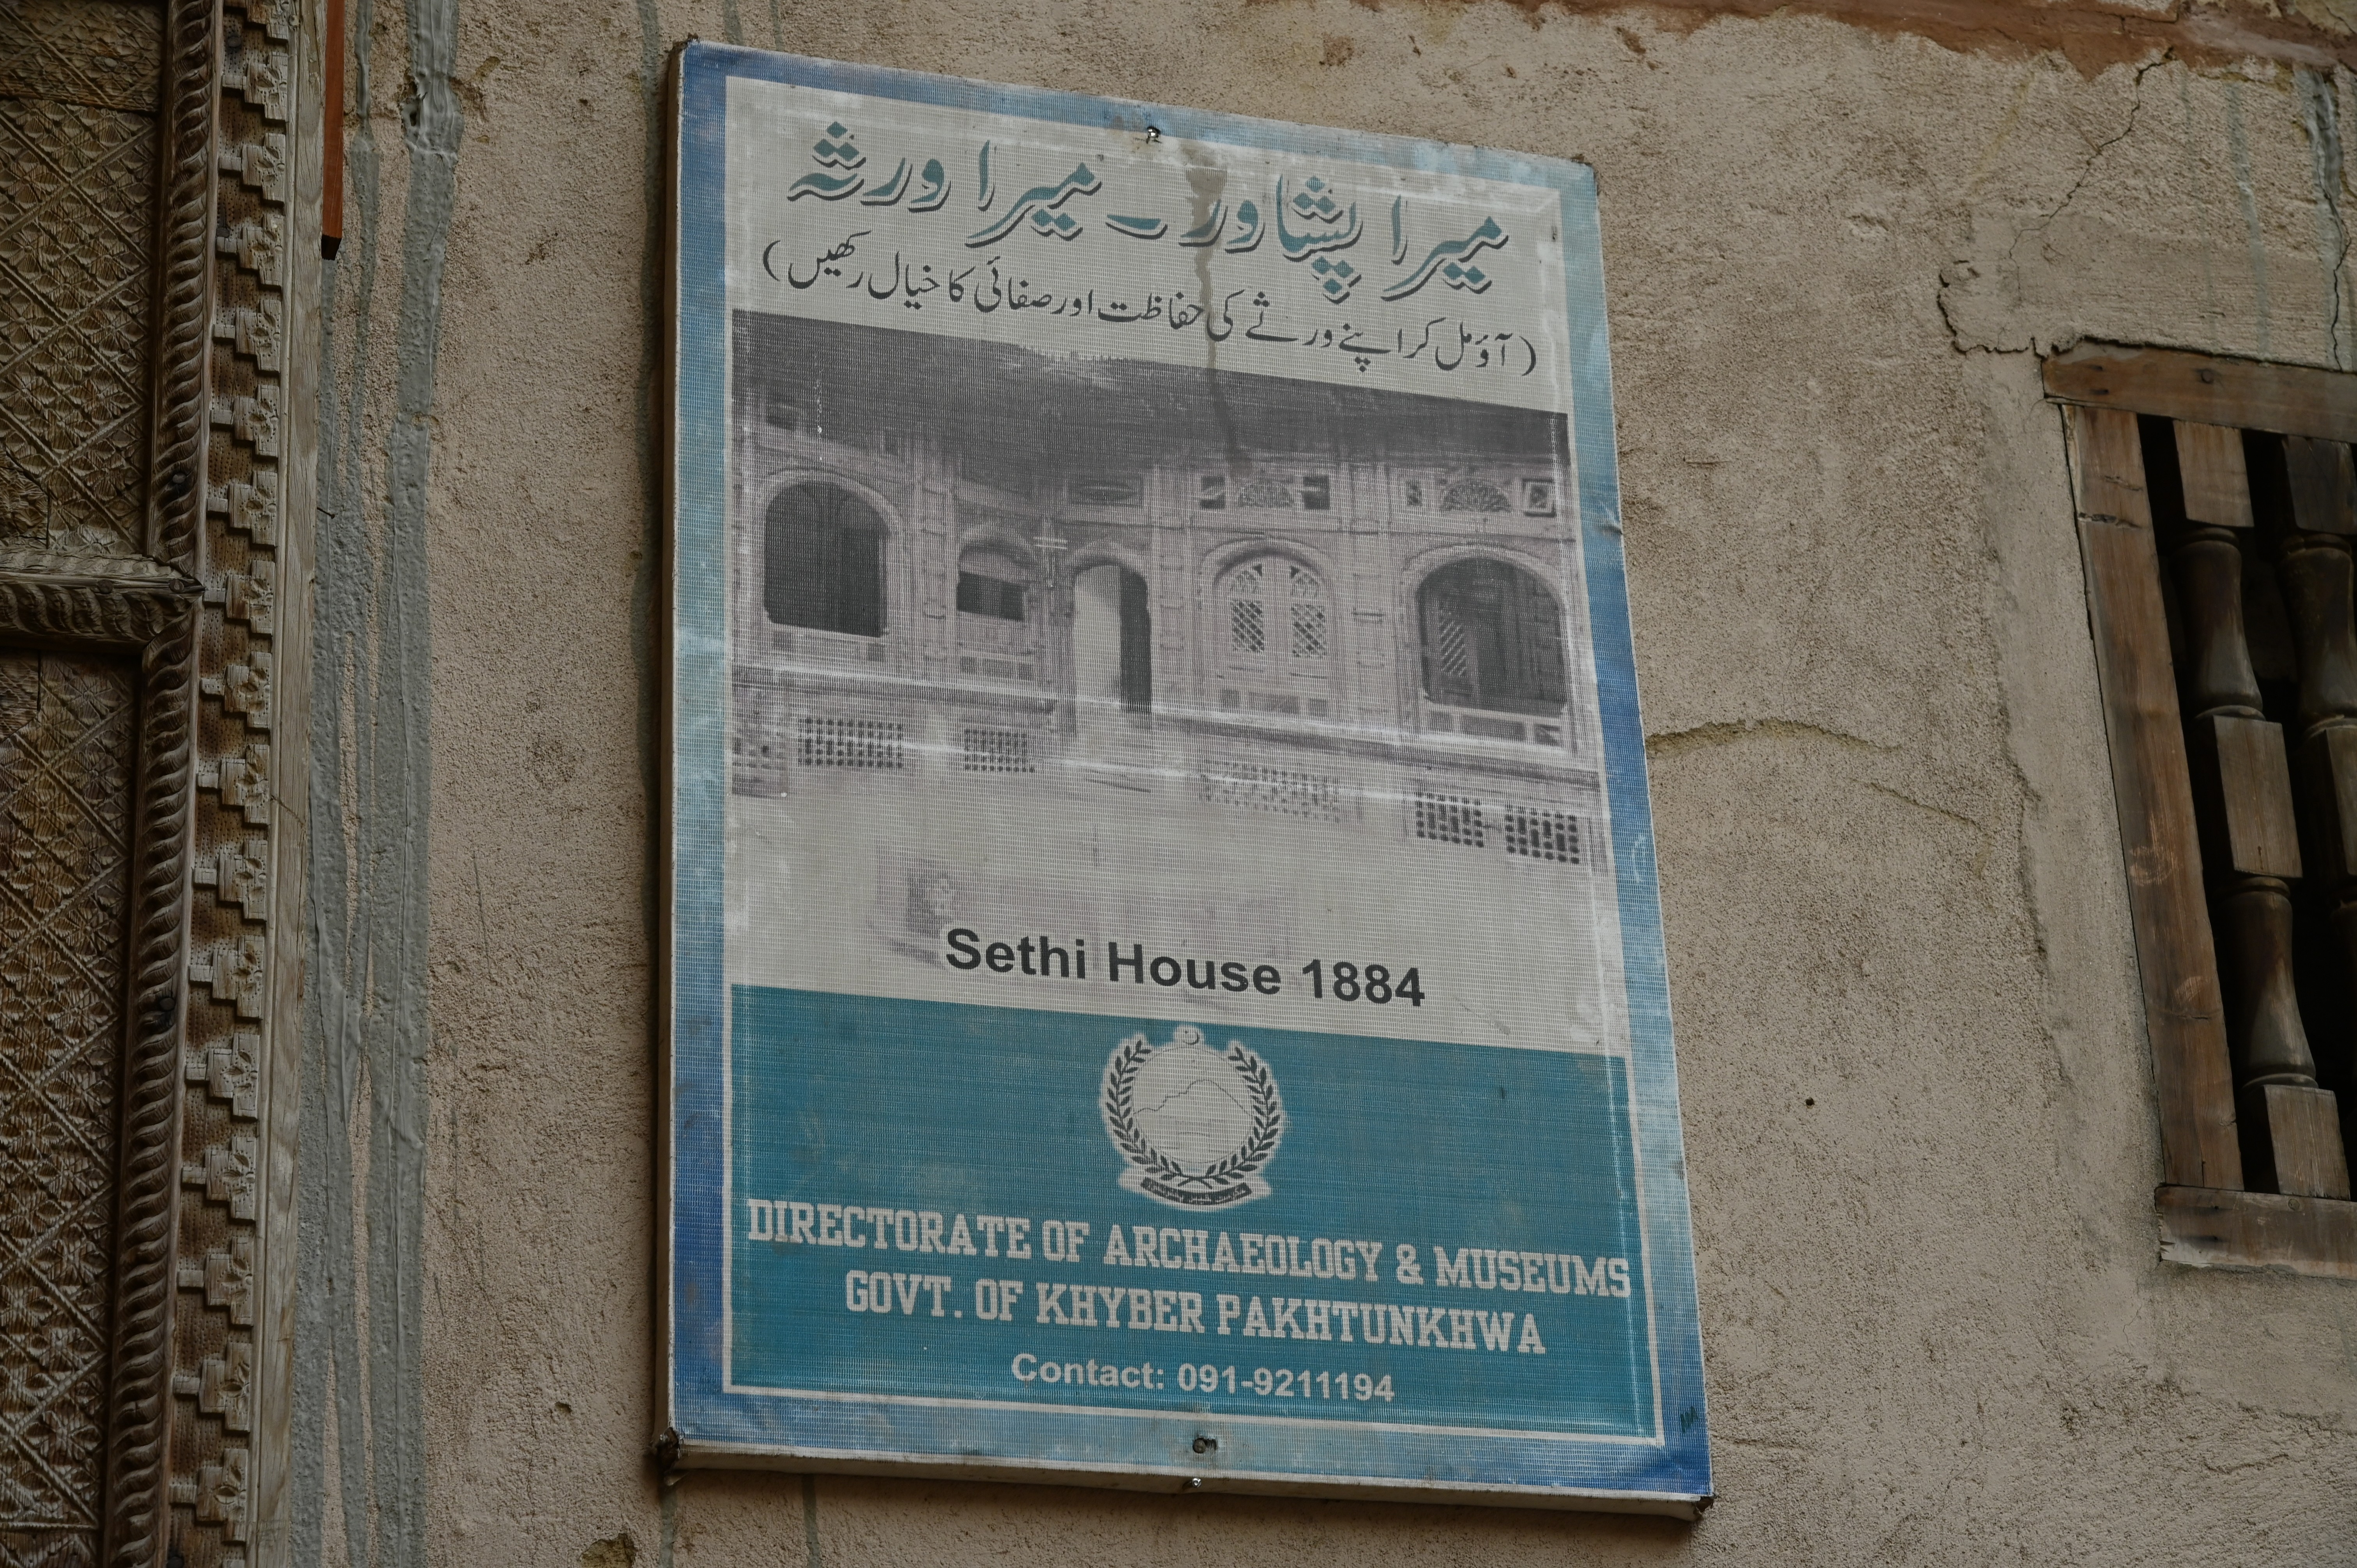 A board displayed on the entrance of sethi house by the Directorate of Archaeology and Museums, Government of Khyber Pakhtunkhwa